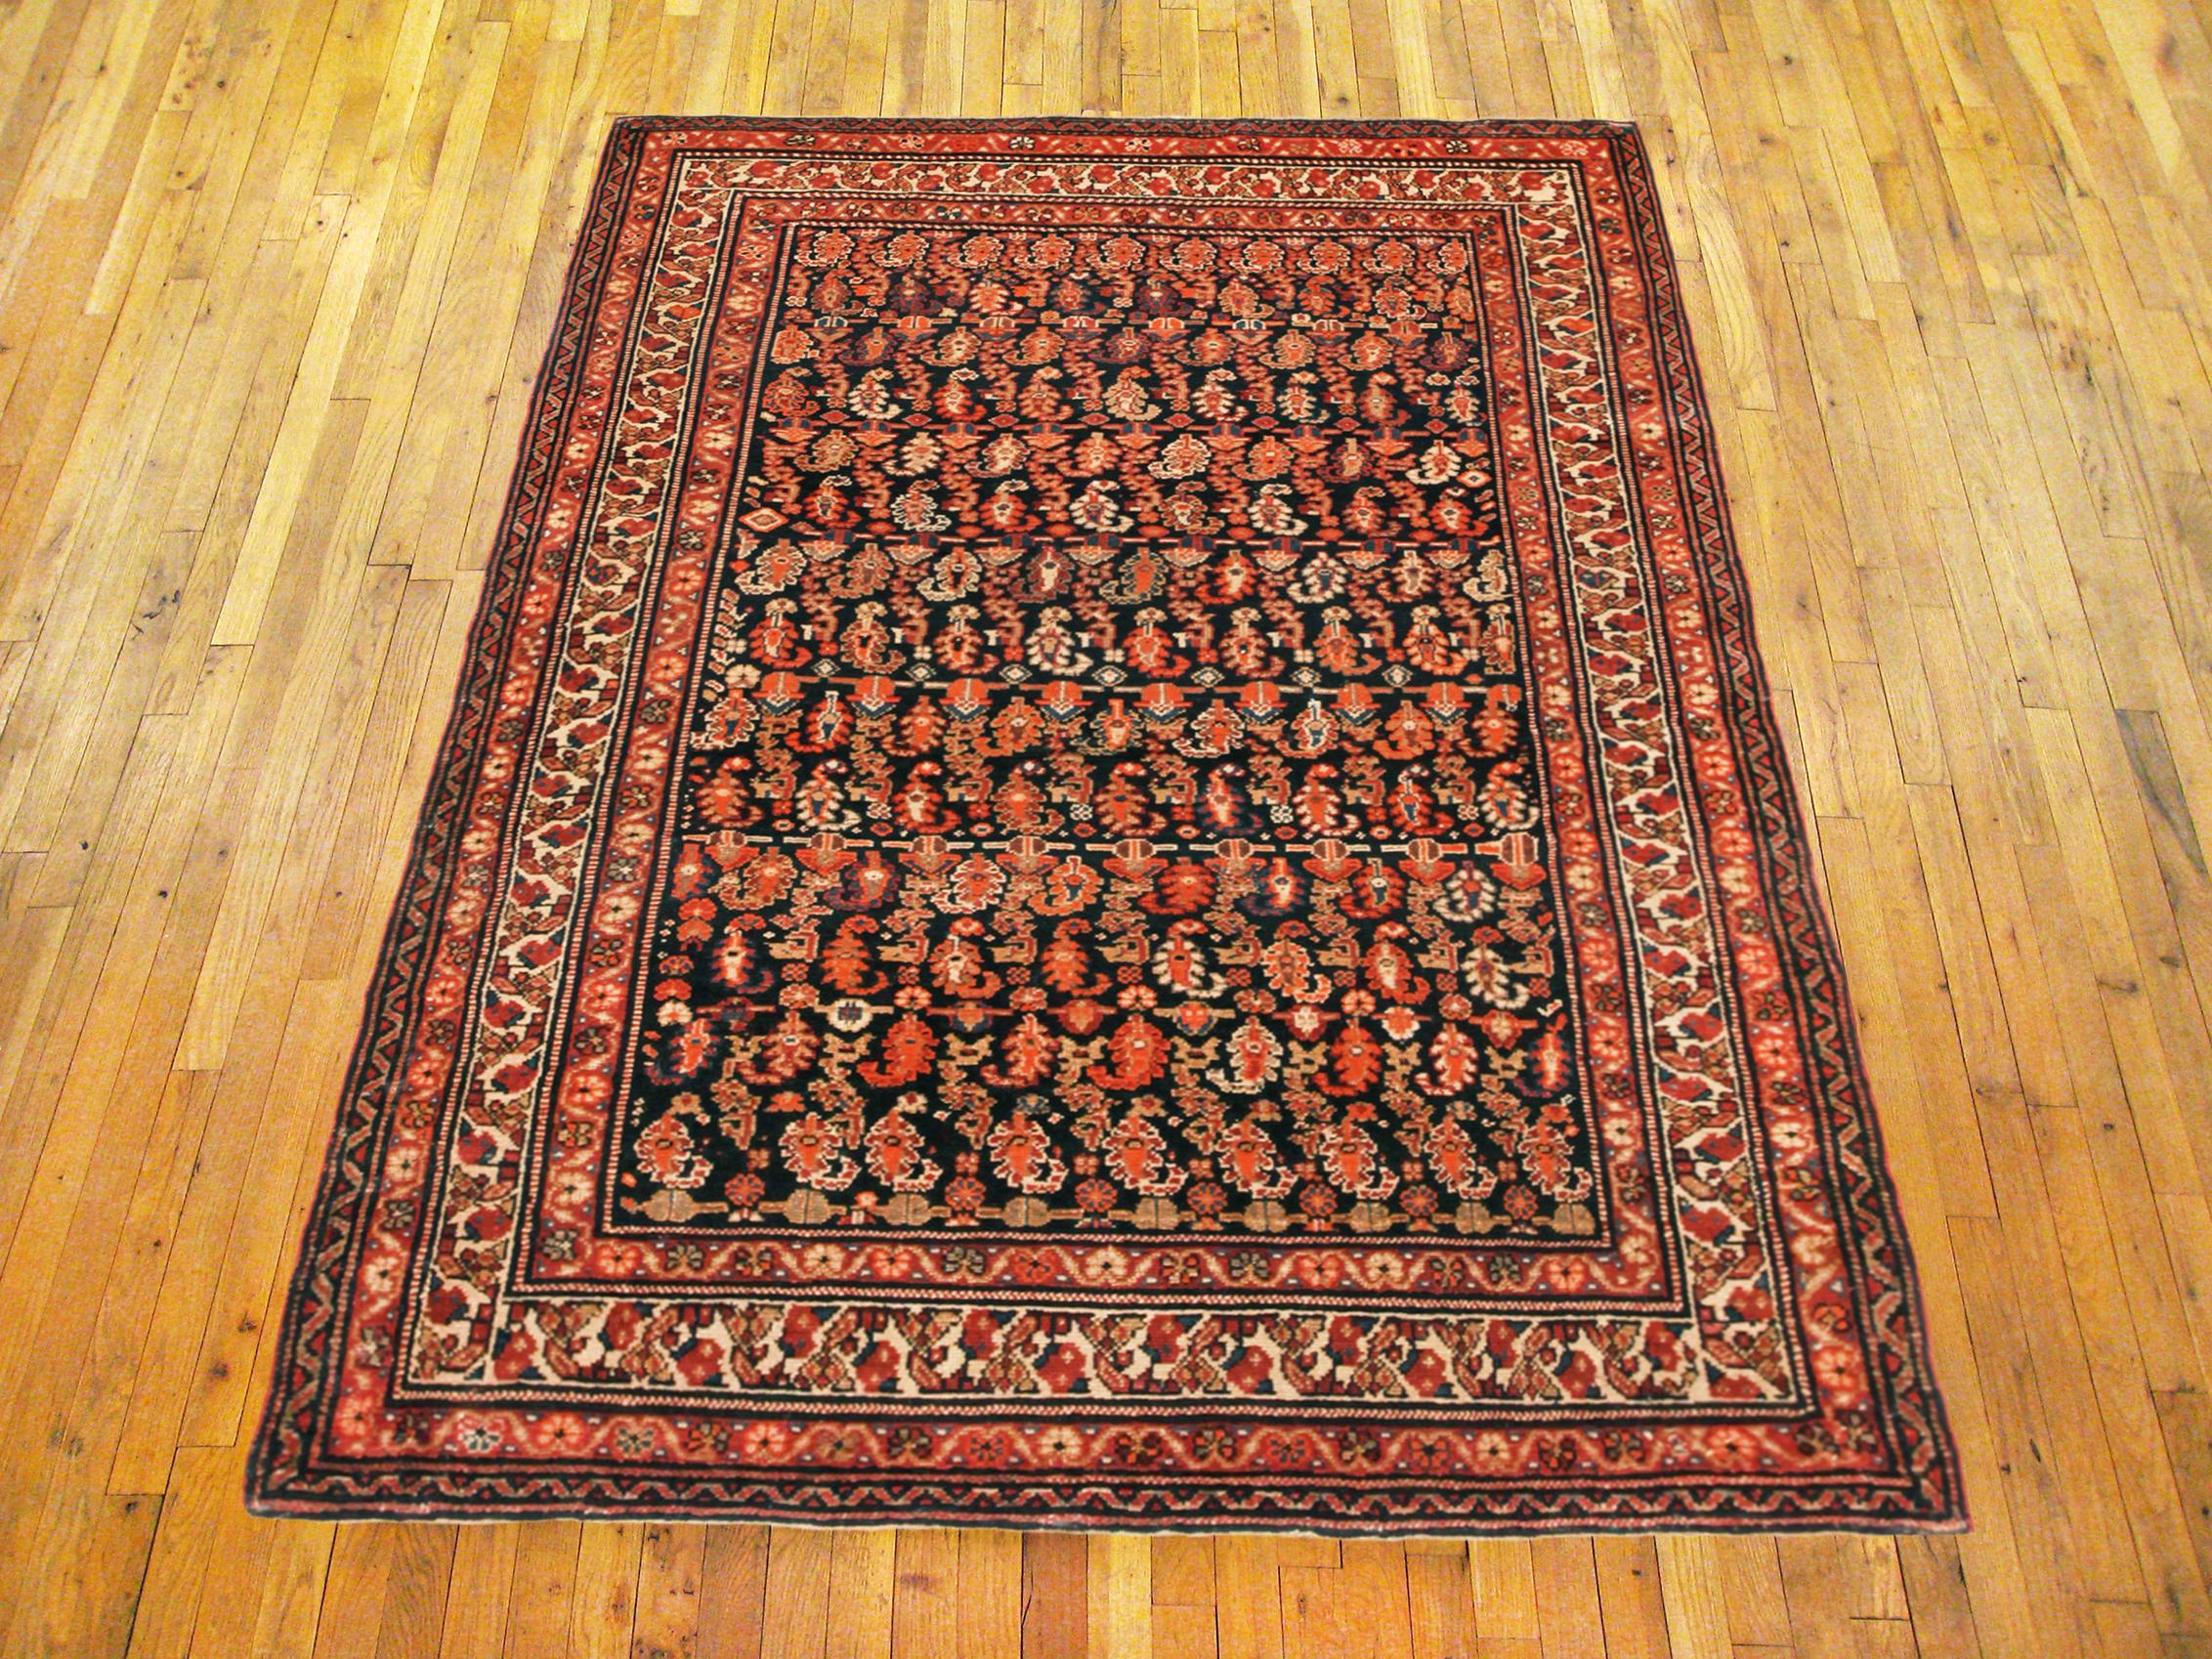 Antique Persian Malayer Oriental rug in Small Size

An antique Persian Malayer oriental rug, circa 1910. Size 5'0